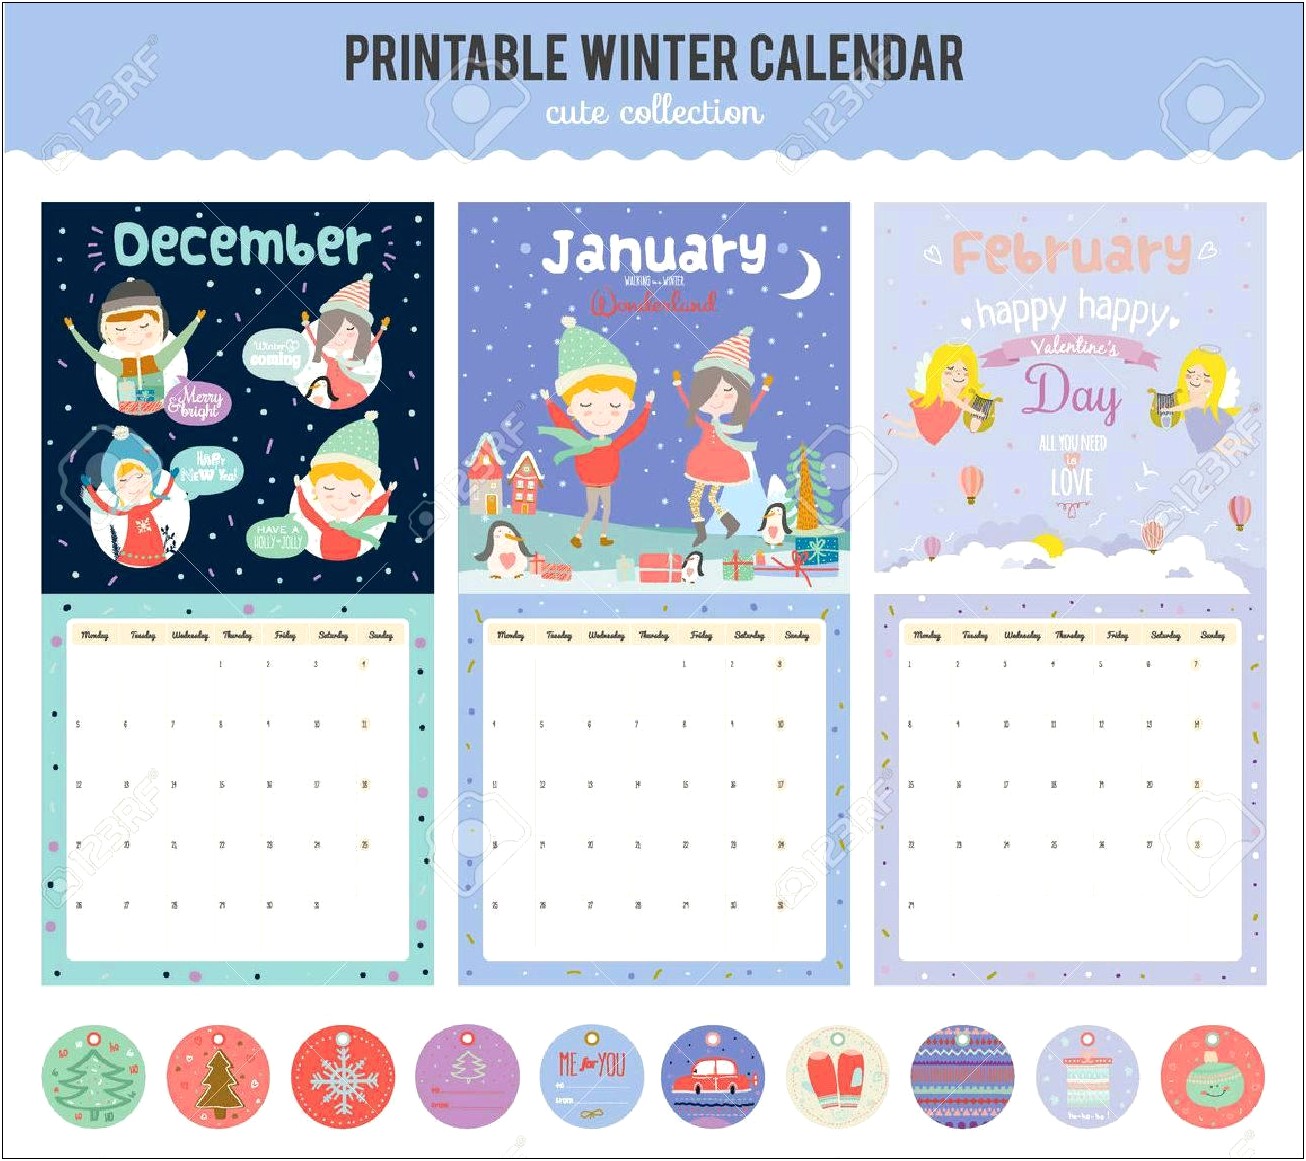 2016 Calendar With Holidays Printable Images Free Template